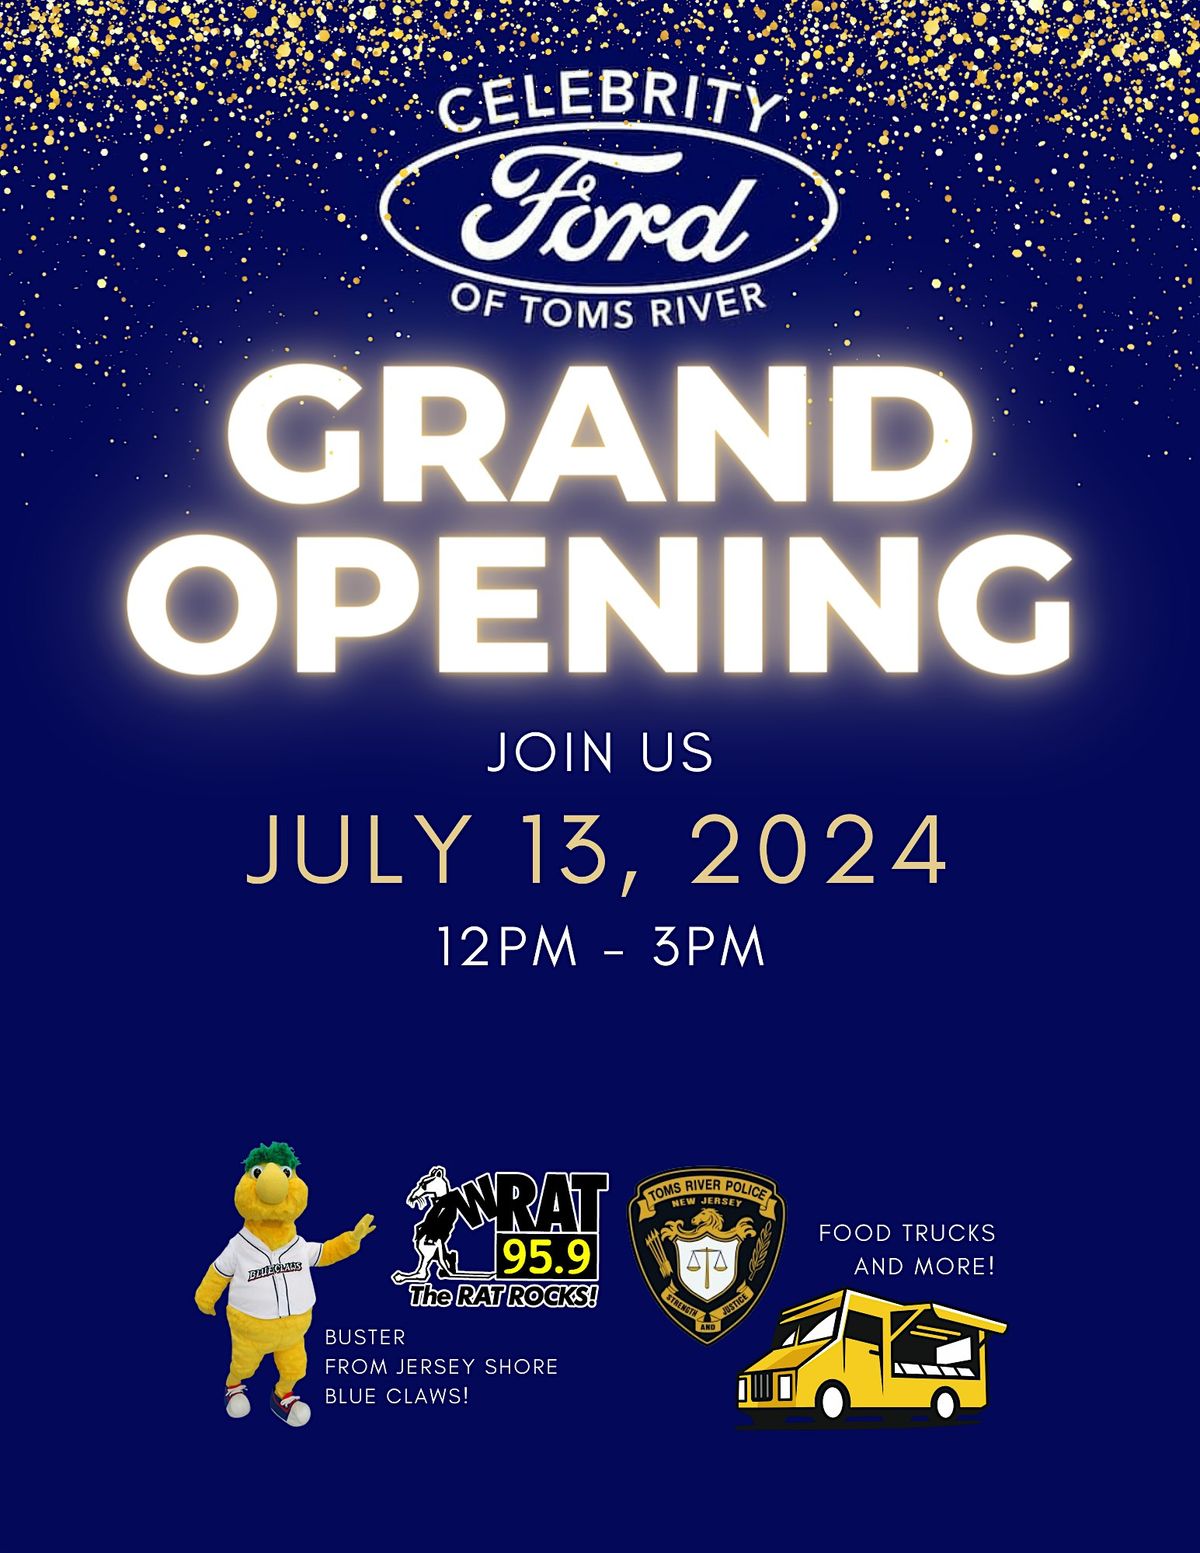 Celebrity Ford of Toms River - Grand Opening